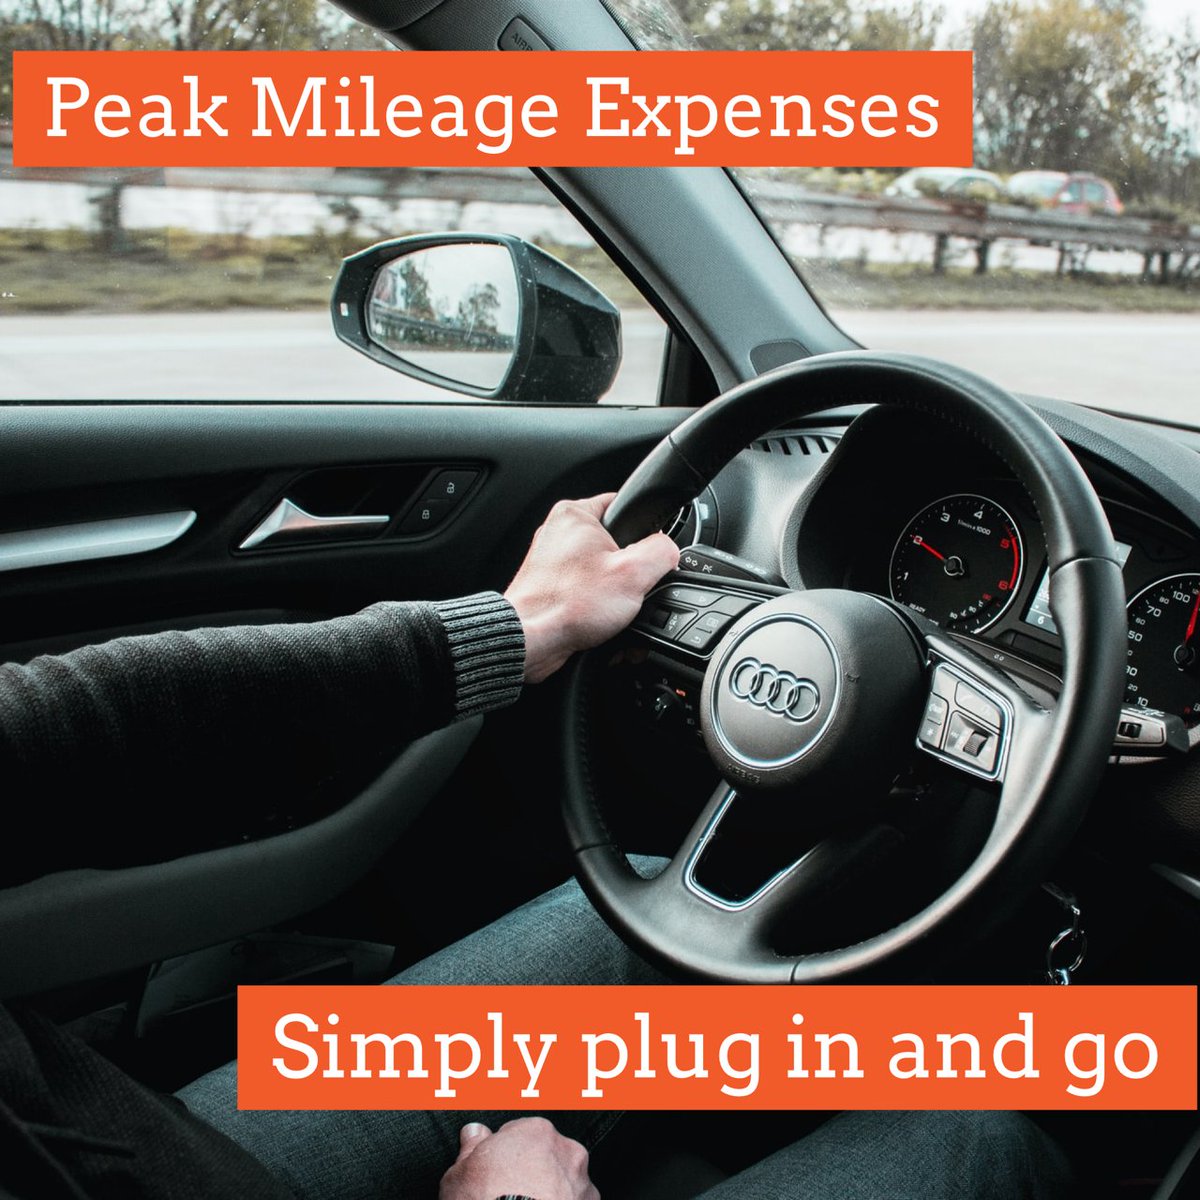 With Peak Mileage Expenses all you need to do is plug the dongle into the driver’s car for stress free mileage tracking.

Find out more 
0203-875-8930
#mileagetracker 
#fleetmanagement 
#expenseclaims 
#companycar
#expensesoftware 
#companyexpenses 
#cartracker